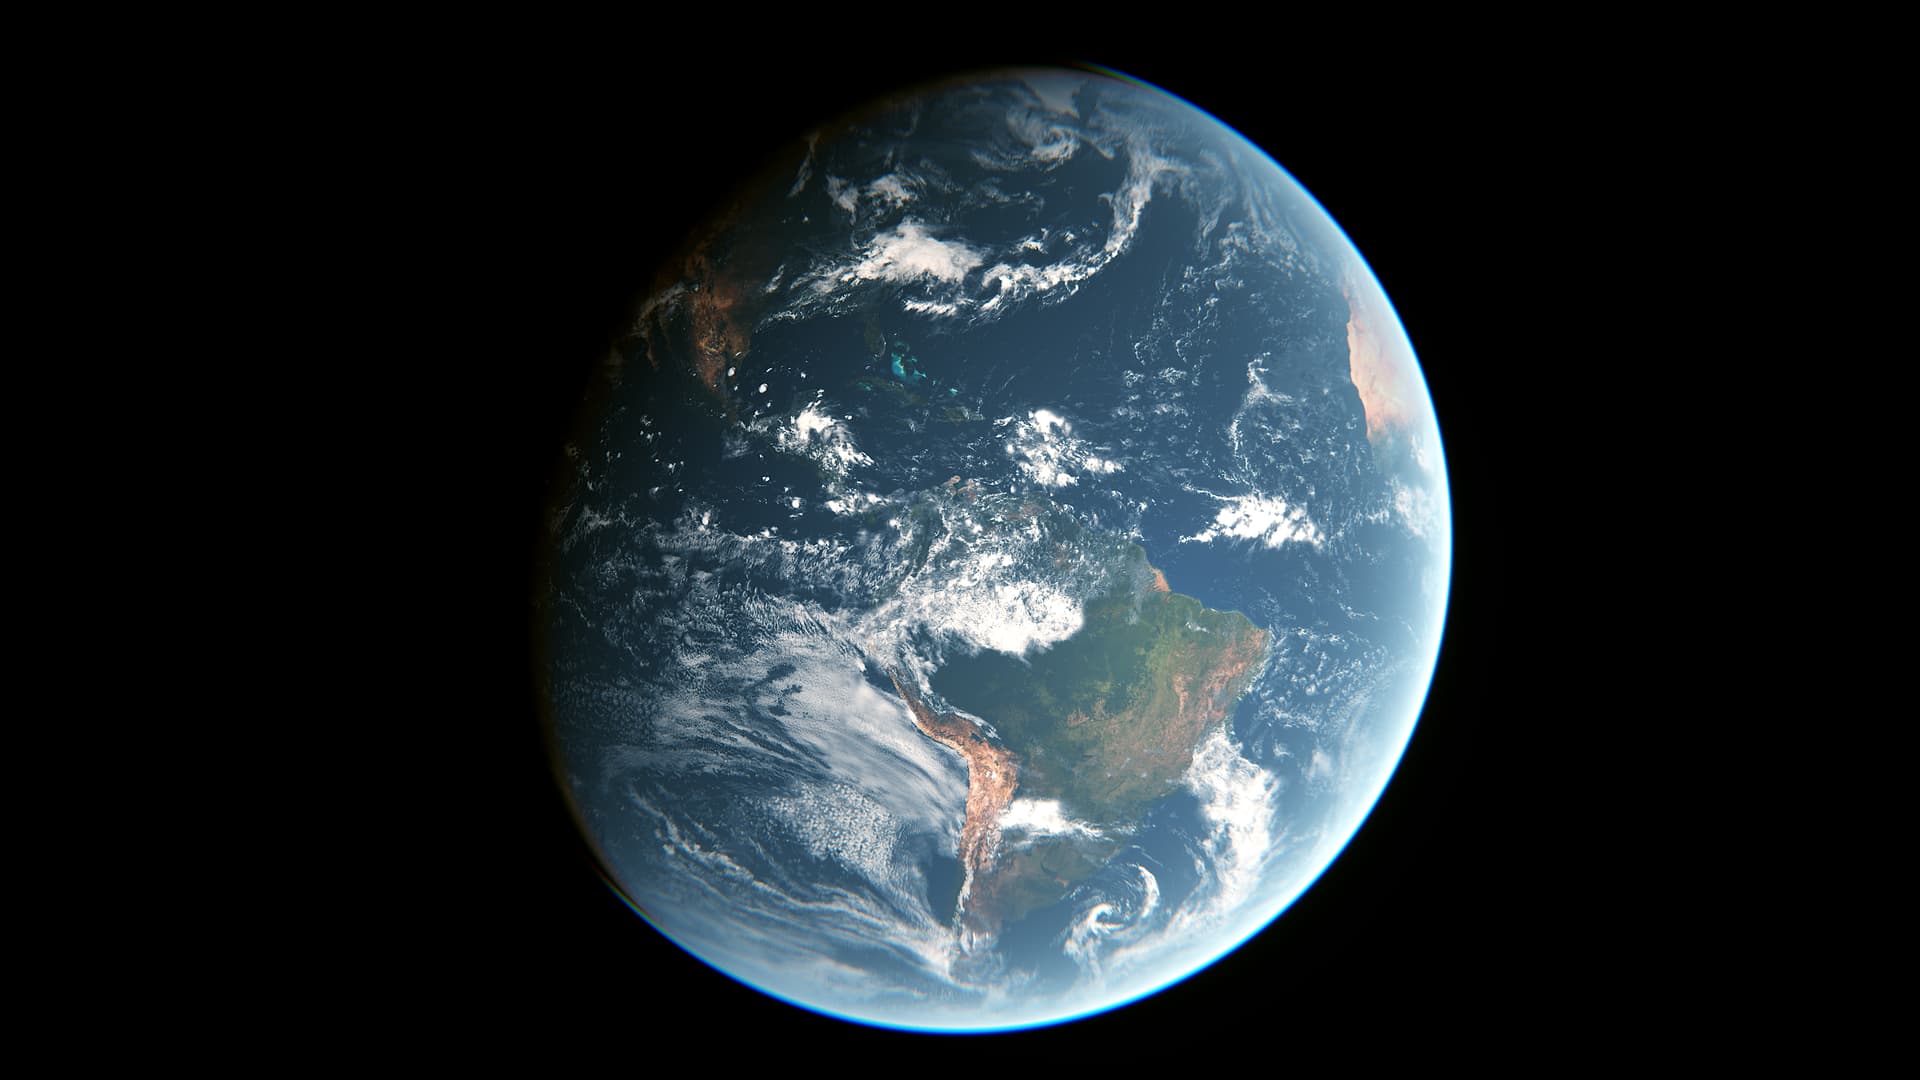 Just one earth на русском. Живая земля. Realistic Earth. Just one Earth. Acid Shaders (World Space) r3.